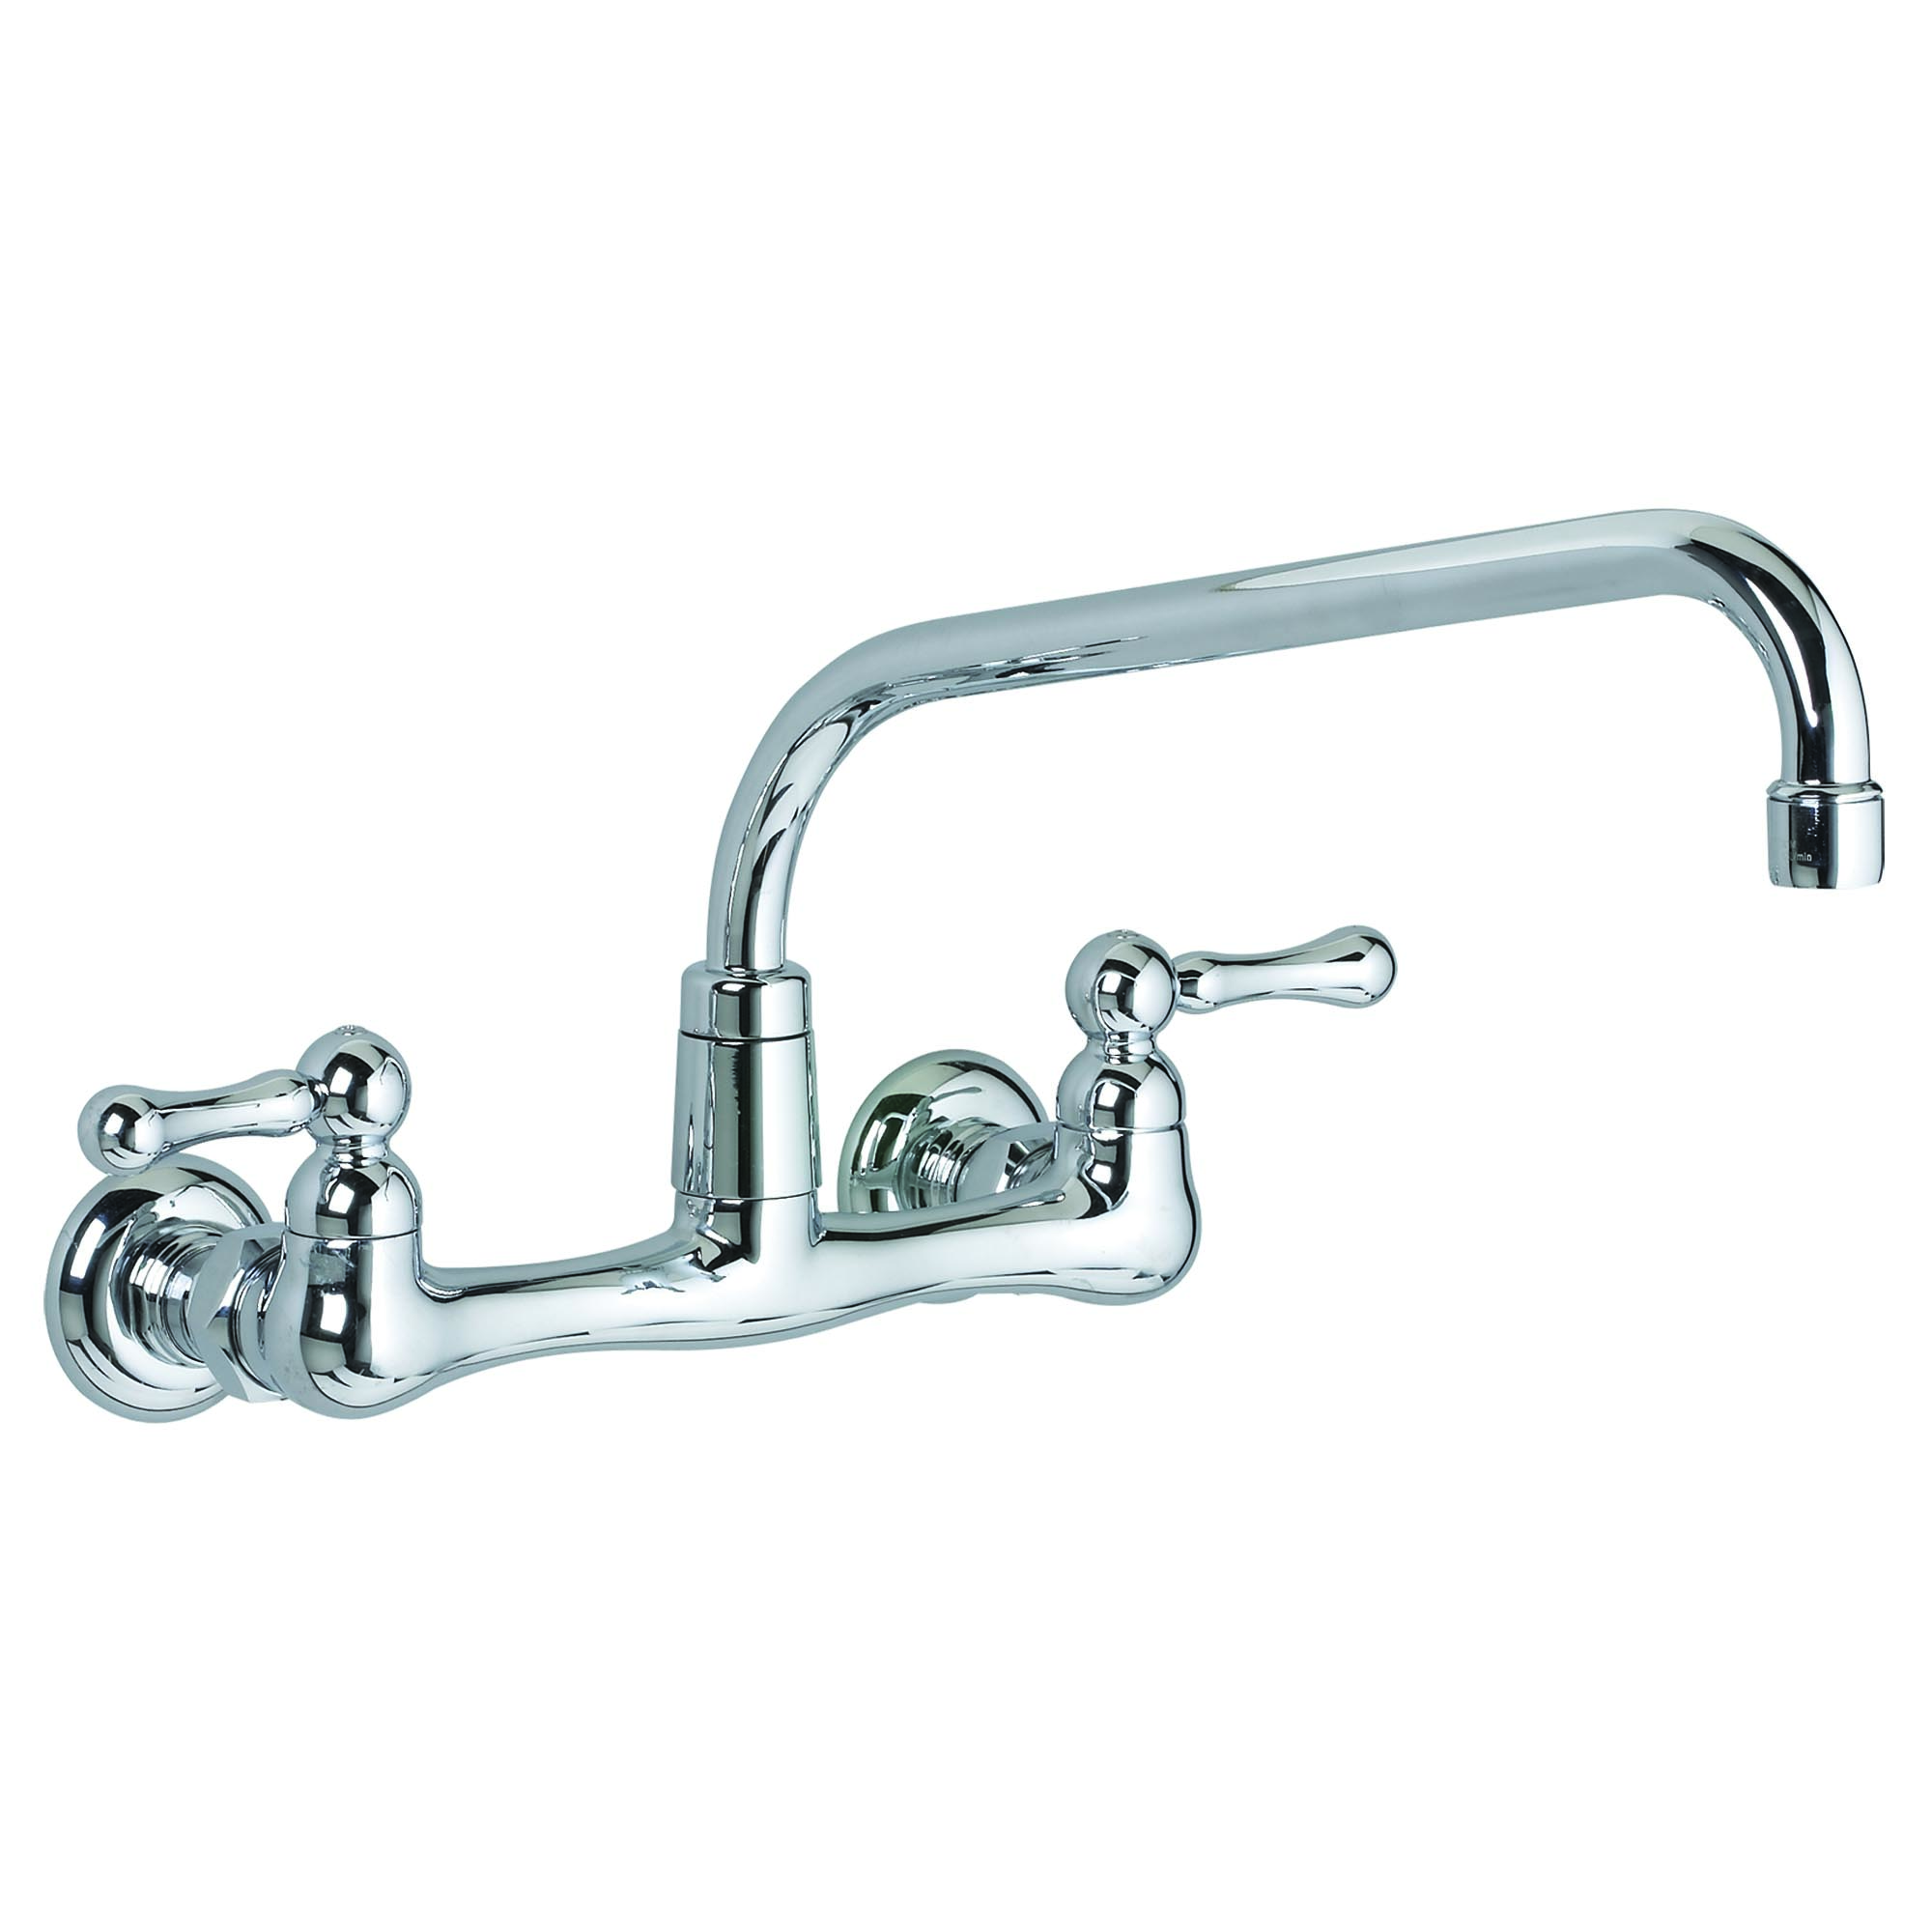 American Standard 7298.152.002 Heritage® Sink Faucet, 2.2 gpm Flow Rate, Swivel Tubular Spout, Polished Chrome, 2 Handles, Import